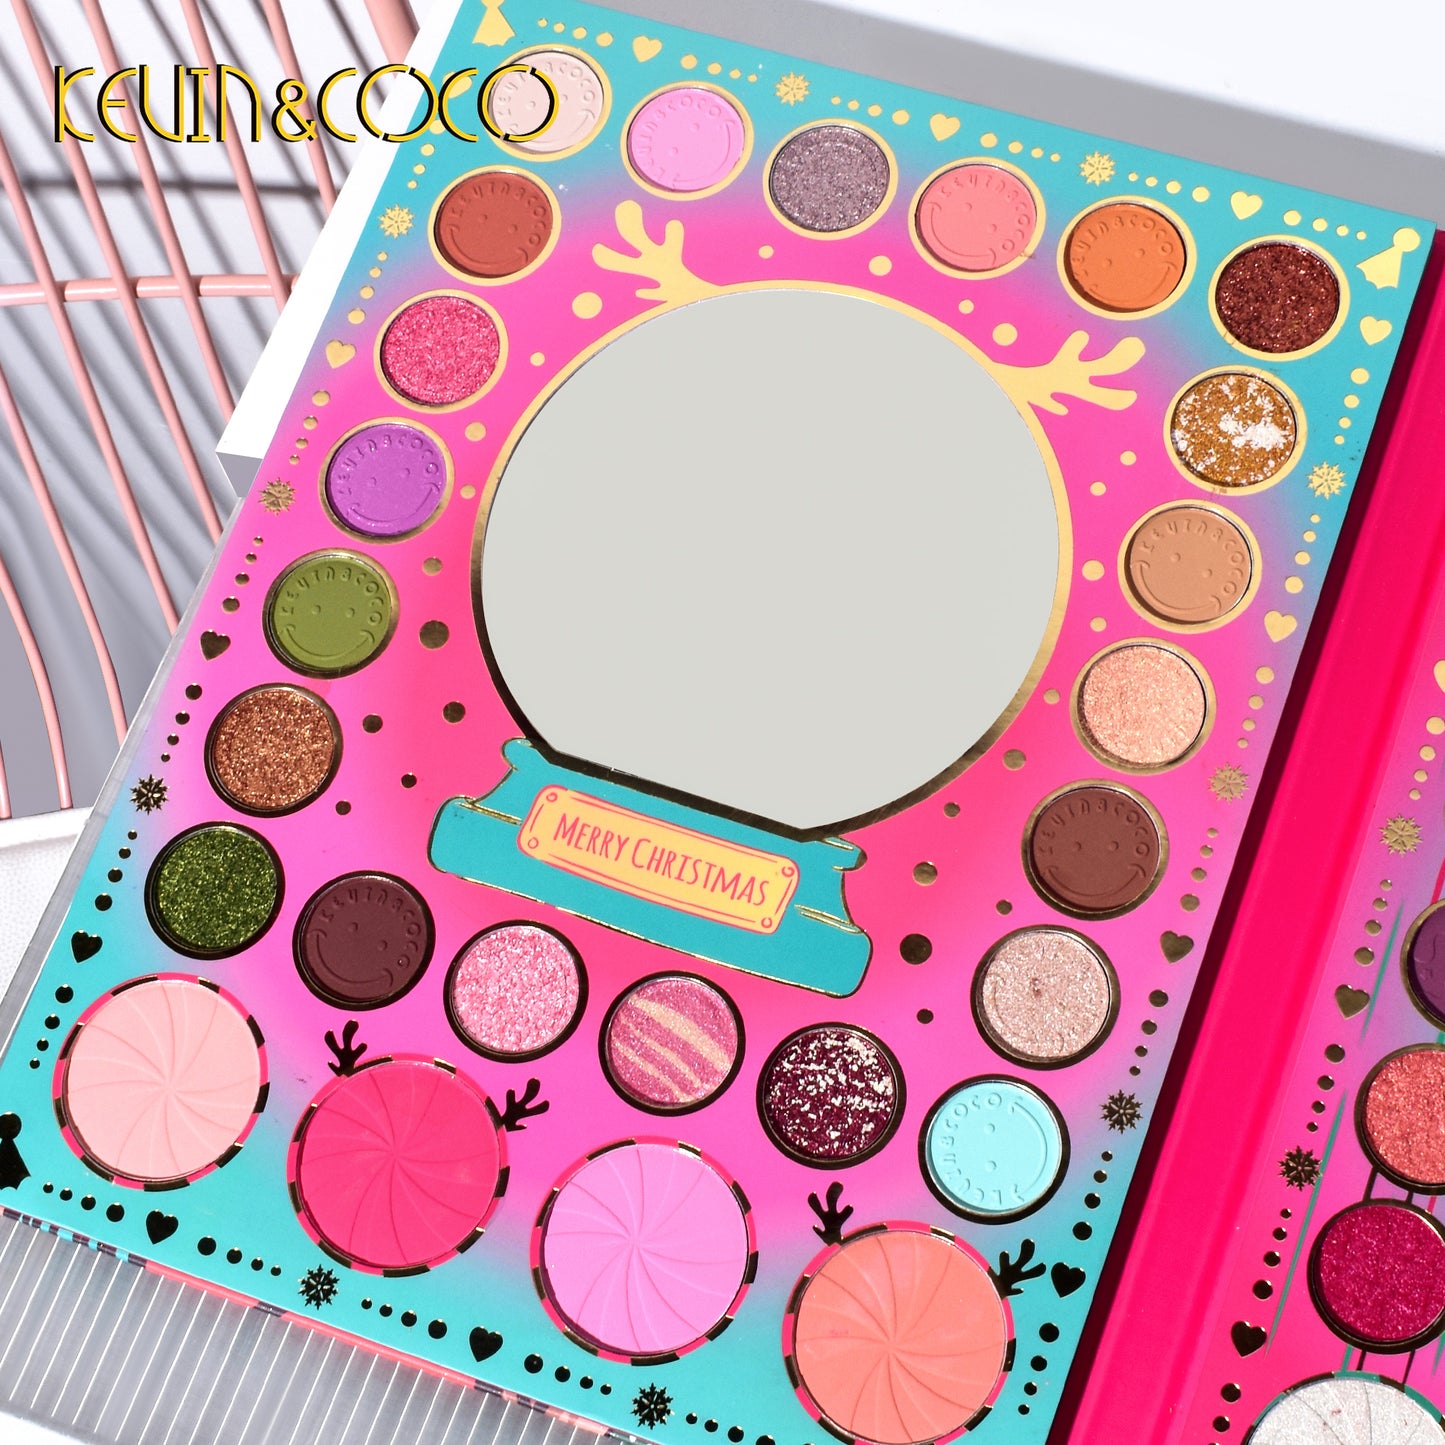 KEVIN & COCO - 72 Colors Christmas Green Bubble Eyeshadow Palette